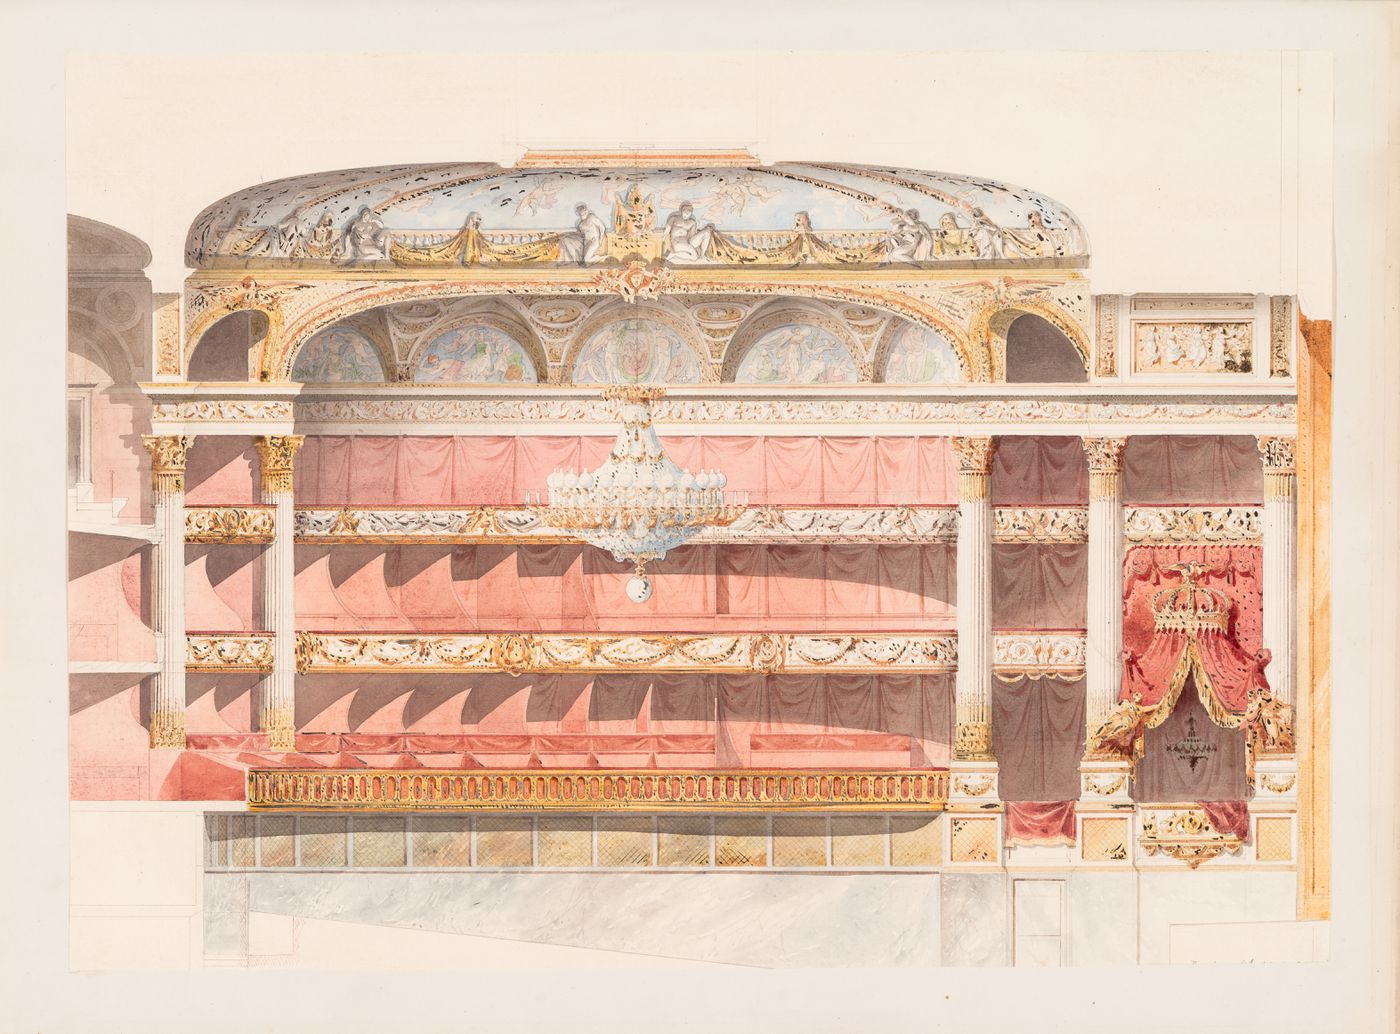 Project for an opera house for the Théâtre impérial de l'opéra: Cross section through the auditorium showing the interior decoration